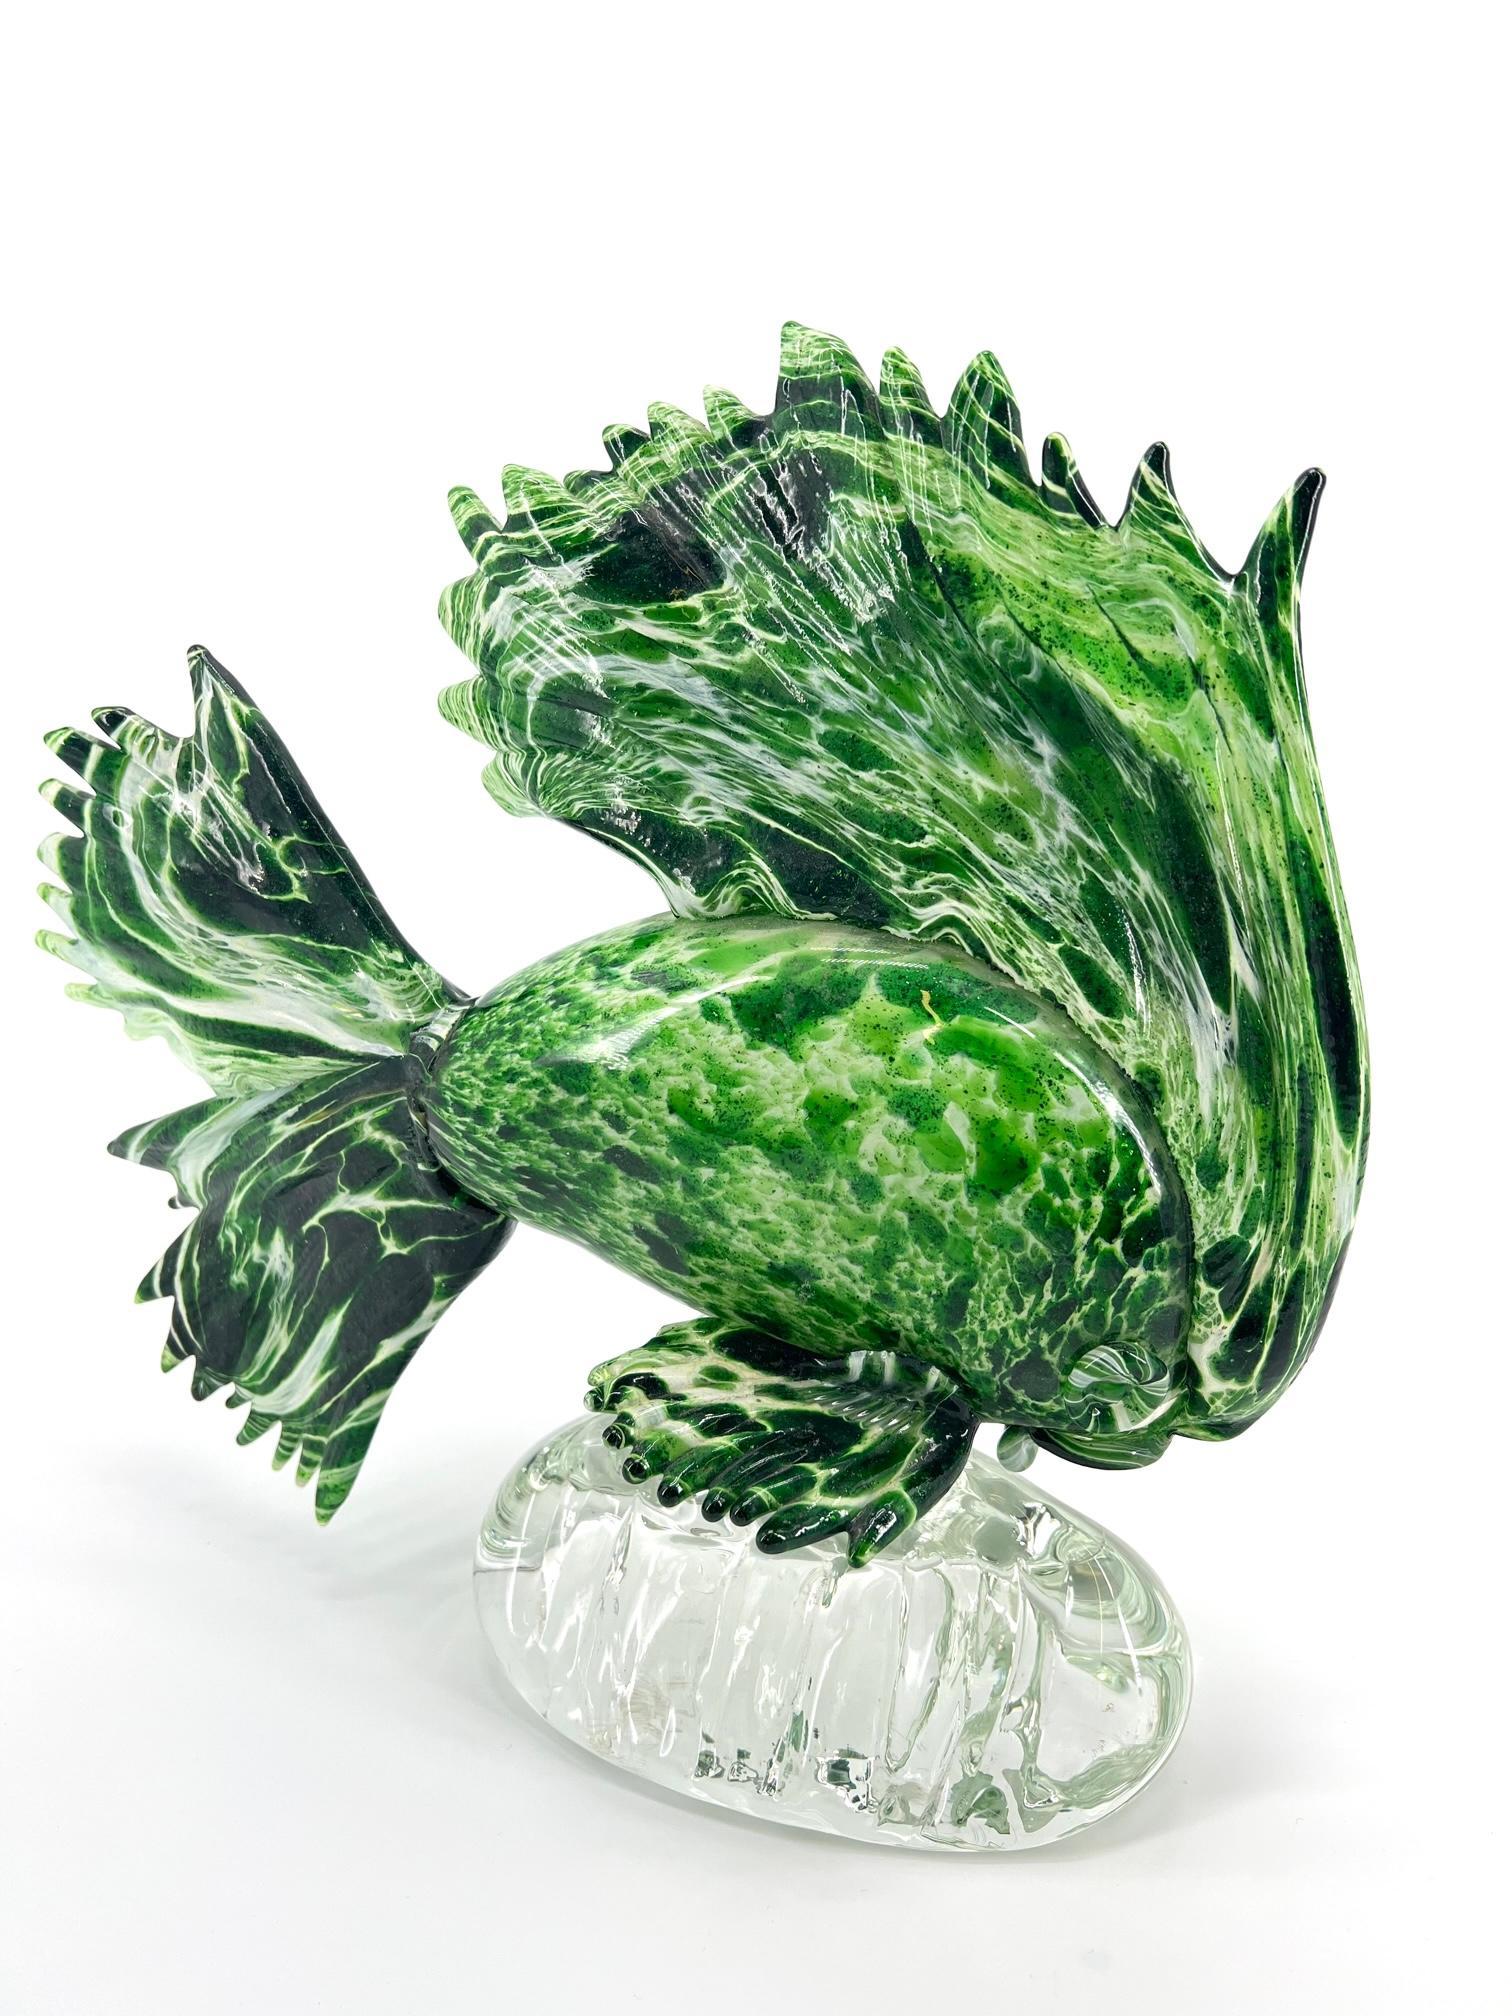 Amazing hand made in Murano / Venice glass fish sculpture, 

Hand blown and made by 1295 MURANO in its furnace workshop located in the Murano Island of Venice.
This Sculpture, of nice sizes, it is made with the technique of the mixed blown glass